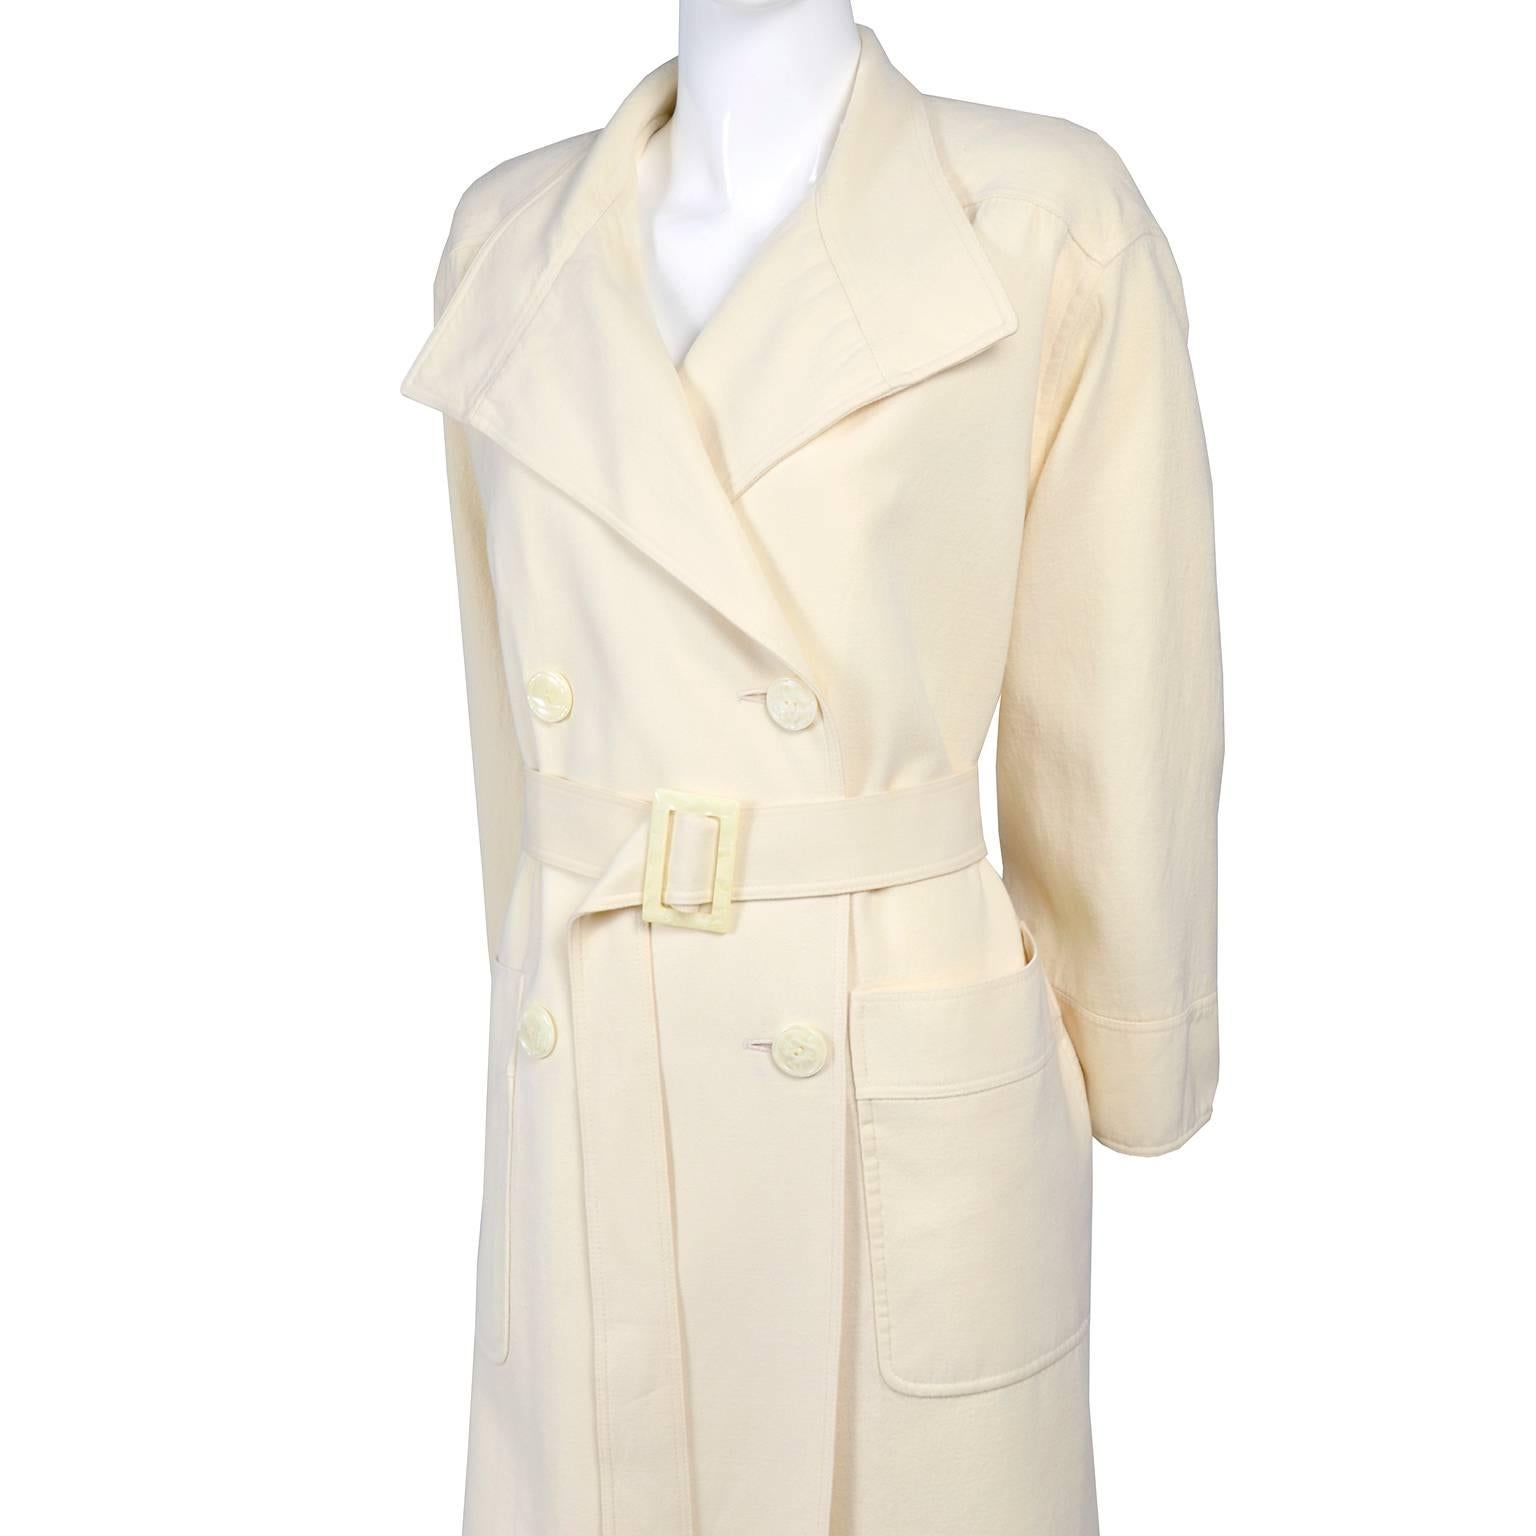 This vintage Valentino coat is a perfect winter addition to your wardrobe!  A Valentino Boutique long cream wool belted trench coat. 
with six mother of pearl buttons, flared sleeves, two hip patch pockets and the matching belt with MOP buckle. This